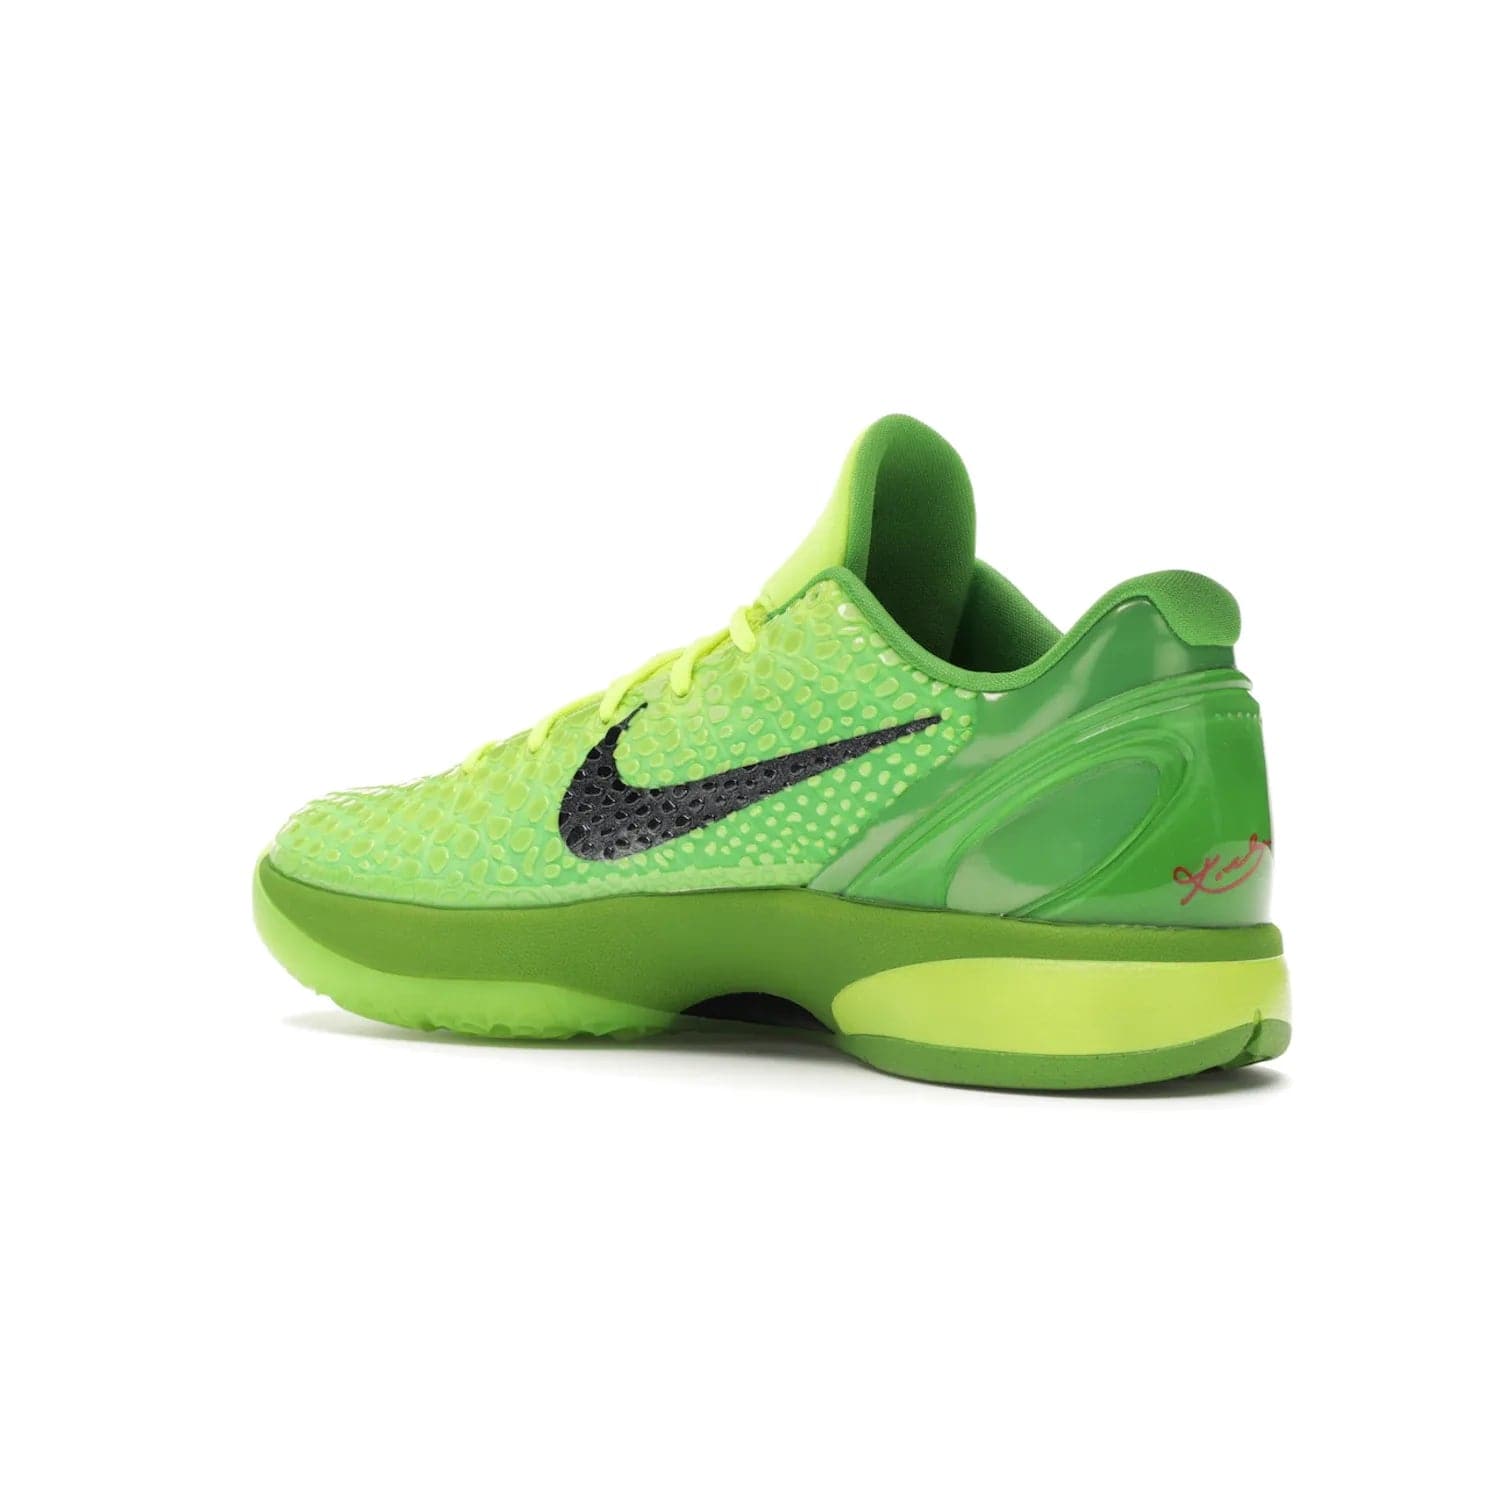 Nike Kobe 6 Protro Grinch (2020) - Image 23 - Only at www.BallersClubKickz.com - #
The Nike Kobe 6 Protro Grinch updates the iconic 2011 design with modern tech like a Zoom Air cushioning system, scaled-down traction, and updated silhouette. Experience the textured Green Apple and Volt upper plus bright red and green accents for $180.